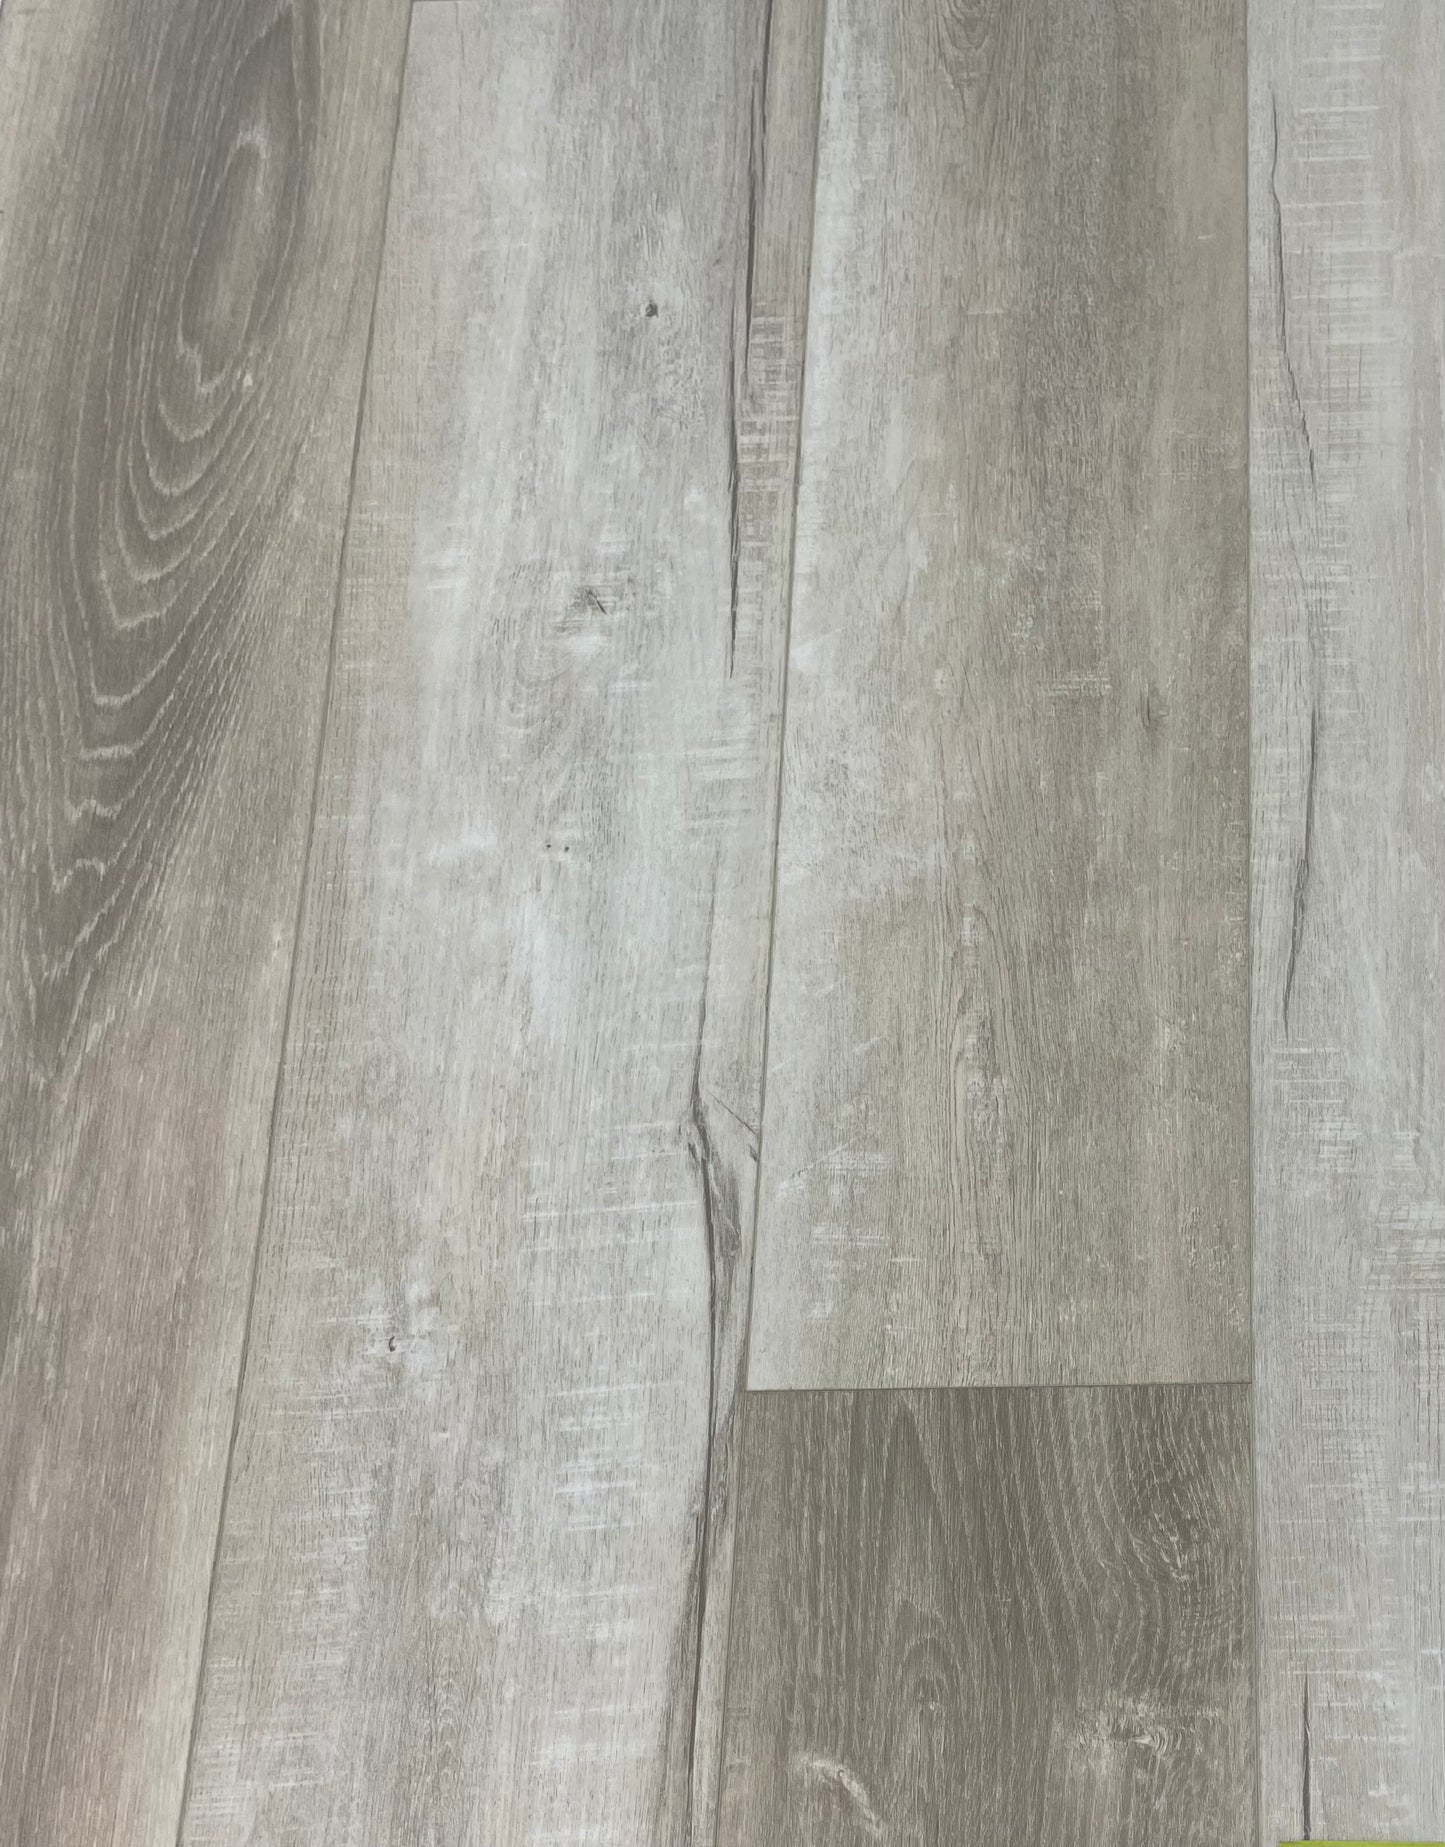 Weathered Oyster Vinyl $2.99/sf 26.72sf/box